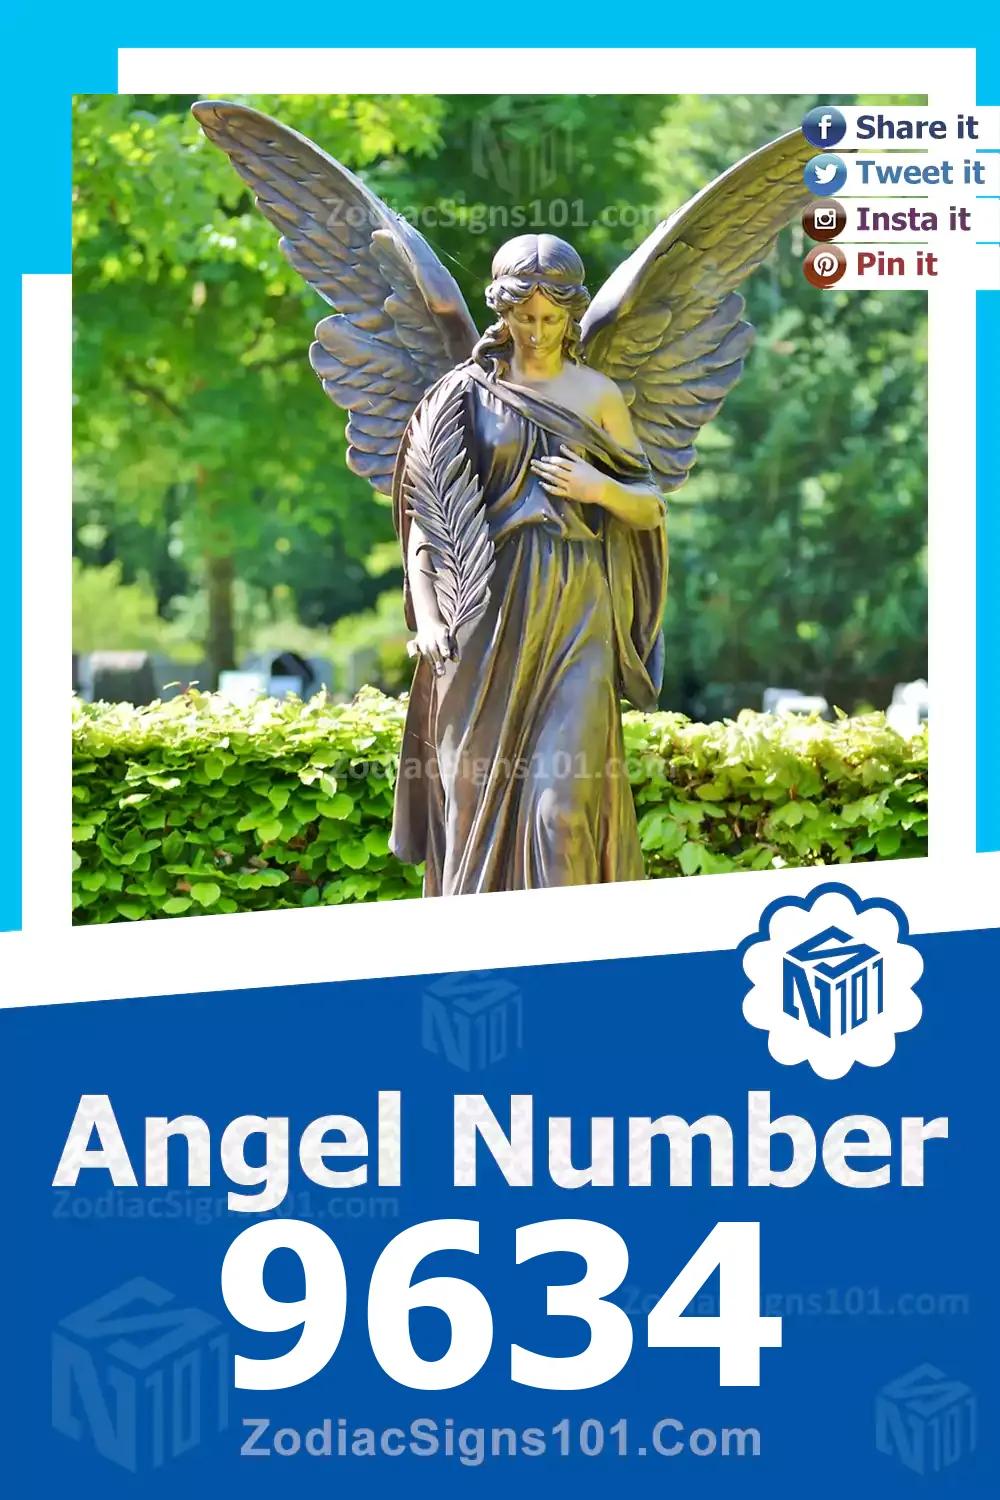 9634 Angel Number Meaning